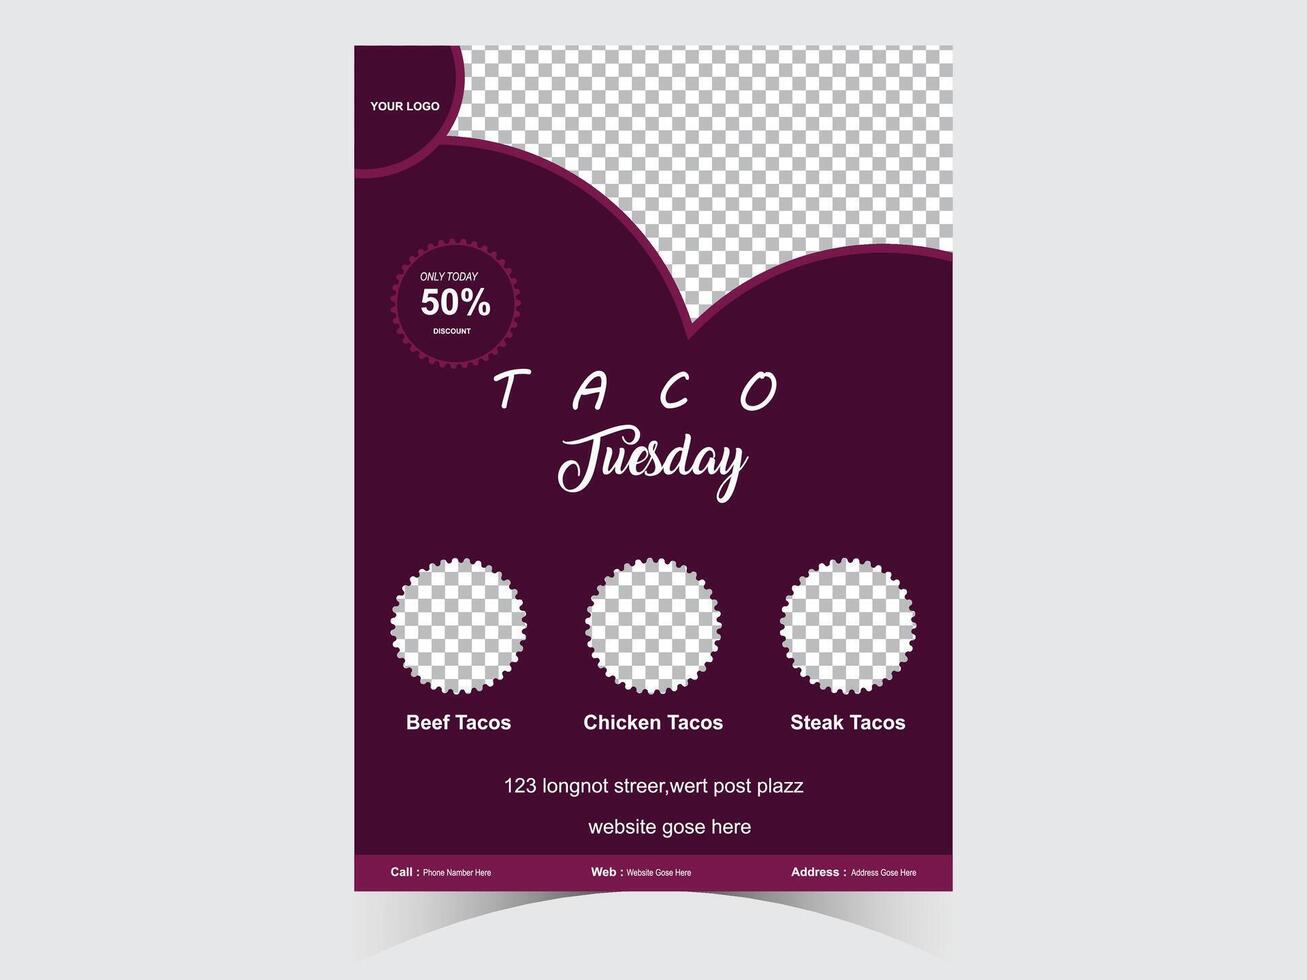 Tacos hot spicy Spanish restaurant menu or fast food restaurant food menu or modern food flyer vector template with a creative layout which can be used for sell offers or food promotion.